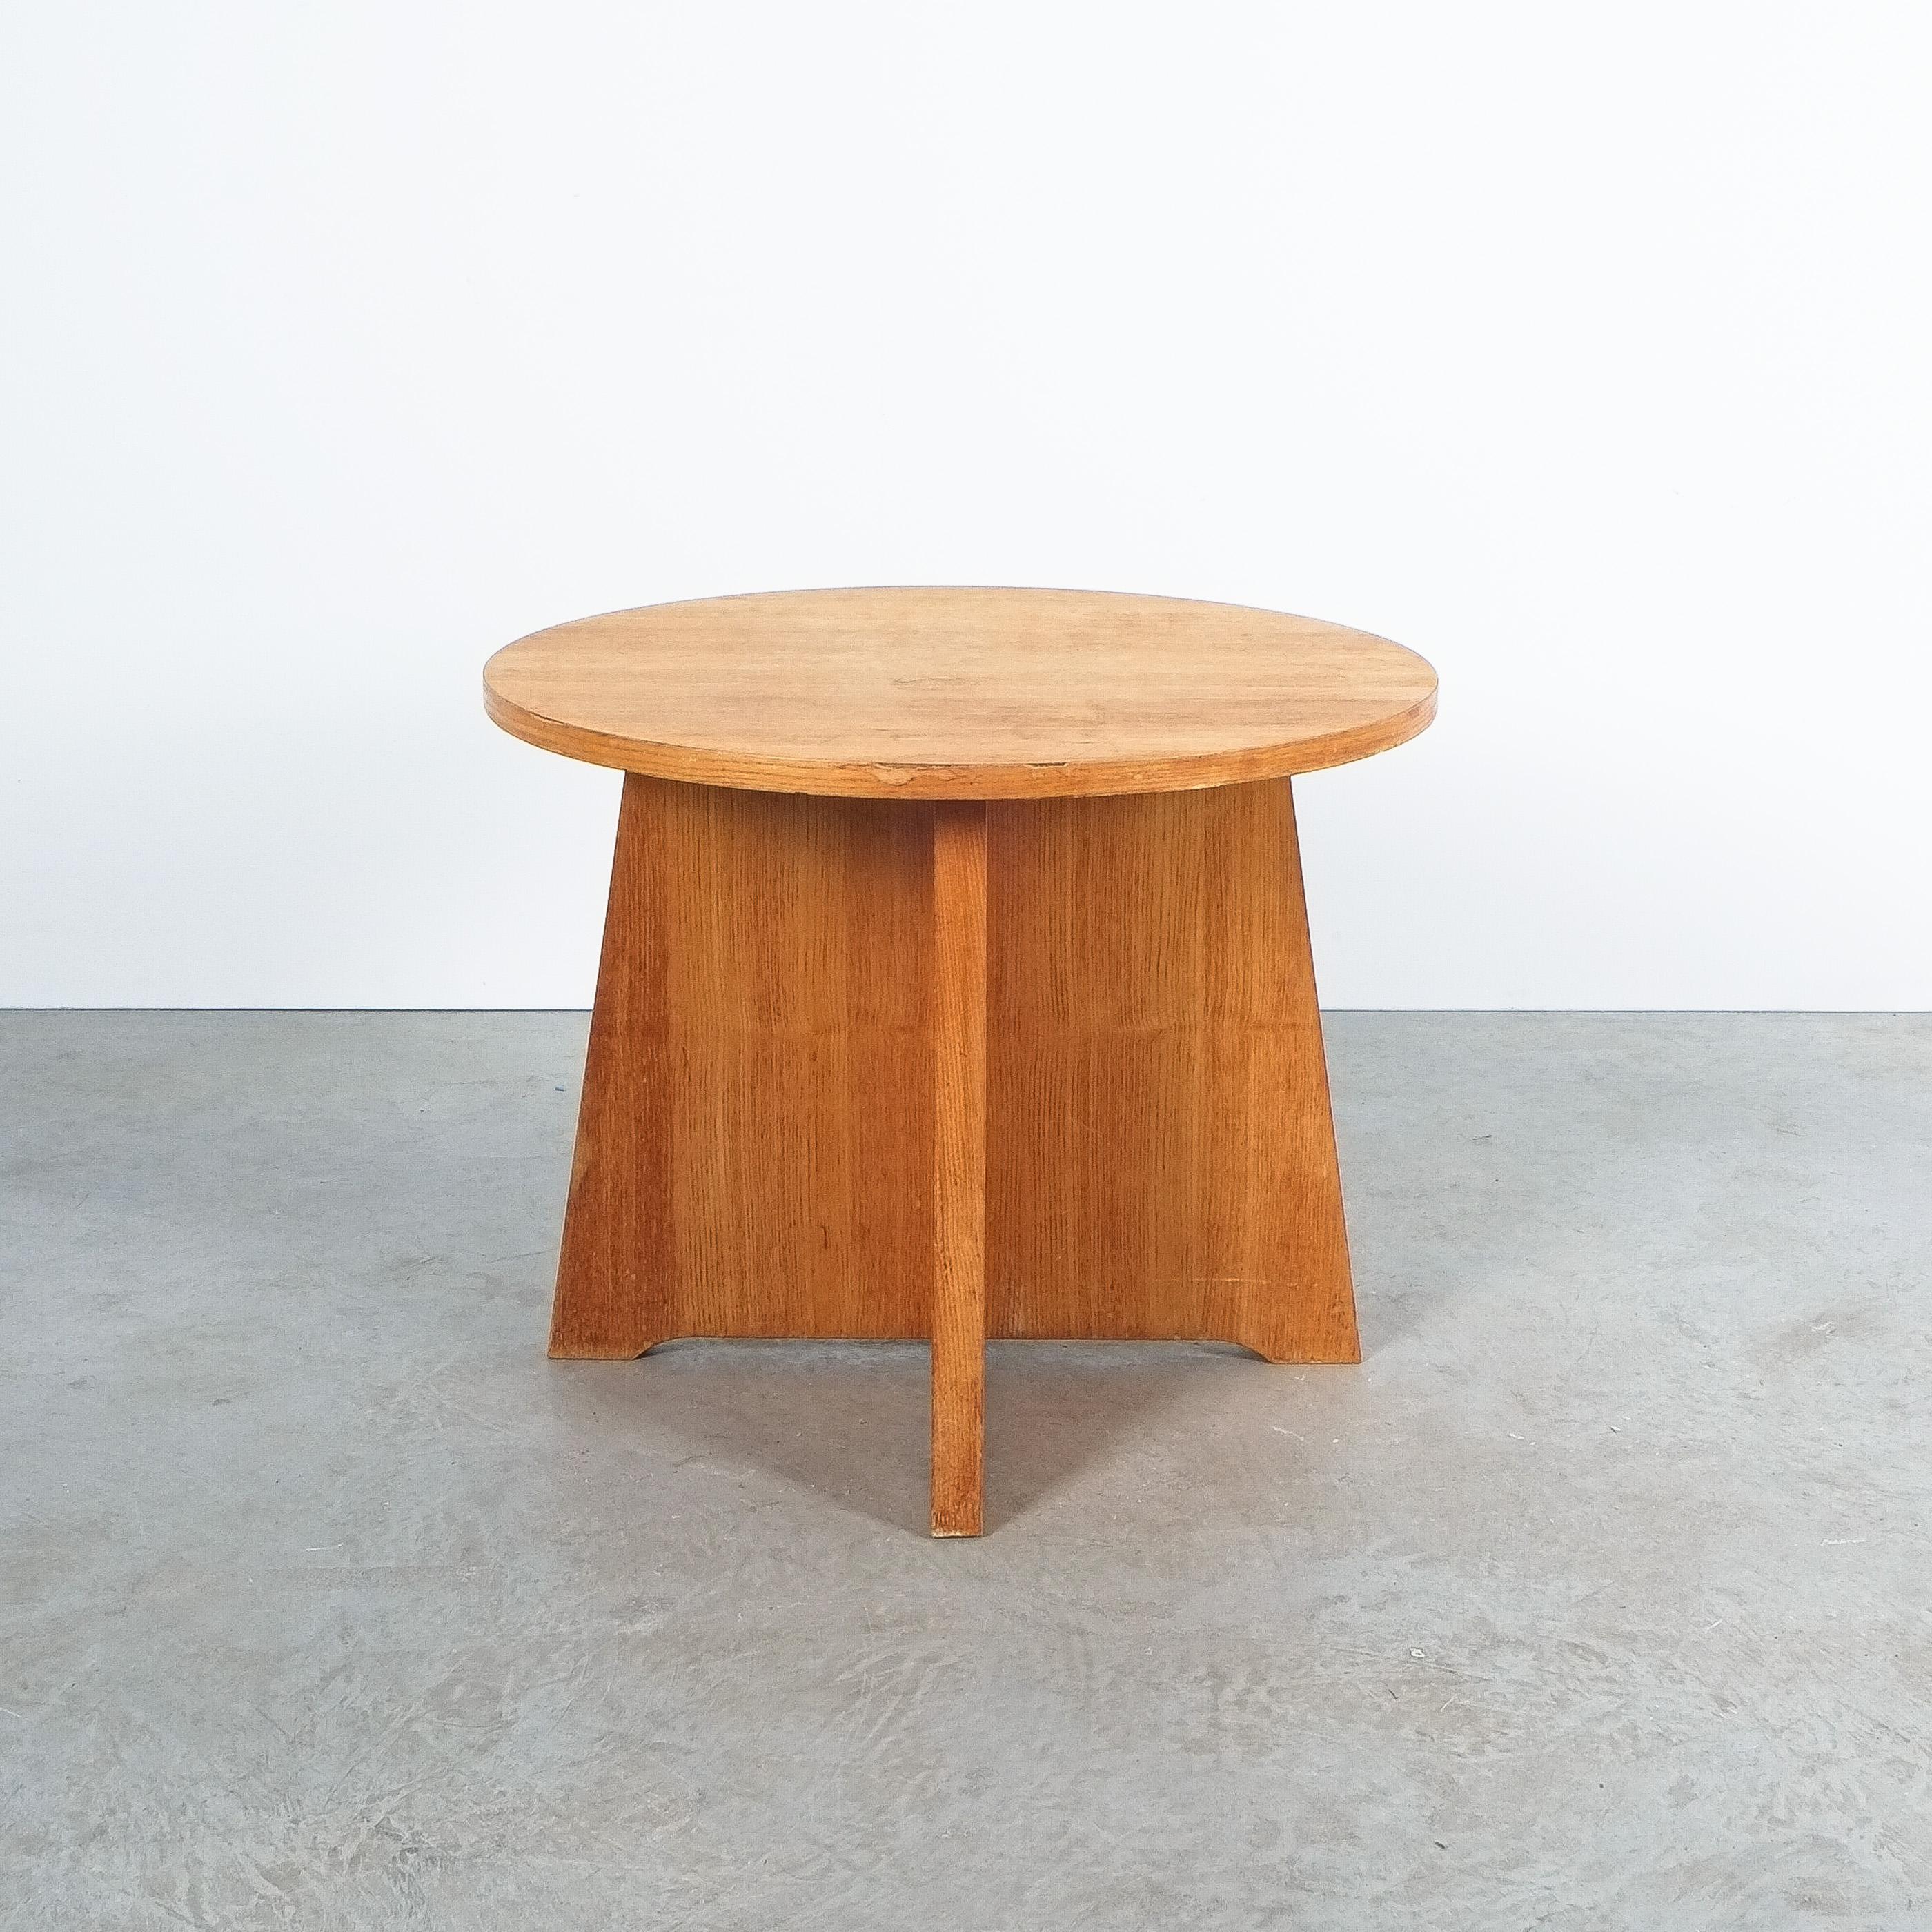 In the style of Axel Einar Hjorth Lovö coffee table, Sweden, 1930-1940

Side table from made from plywood and veneer. It's a bit lower than the original pine wood table by Hjorth. Good condition, some scratches and veneer losses around the edges.